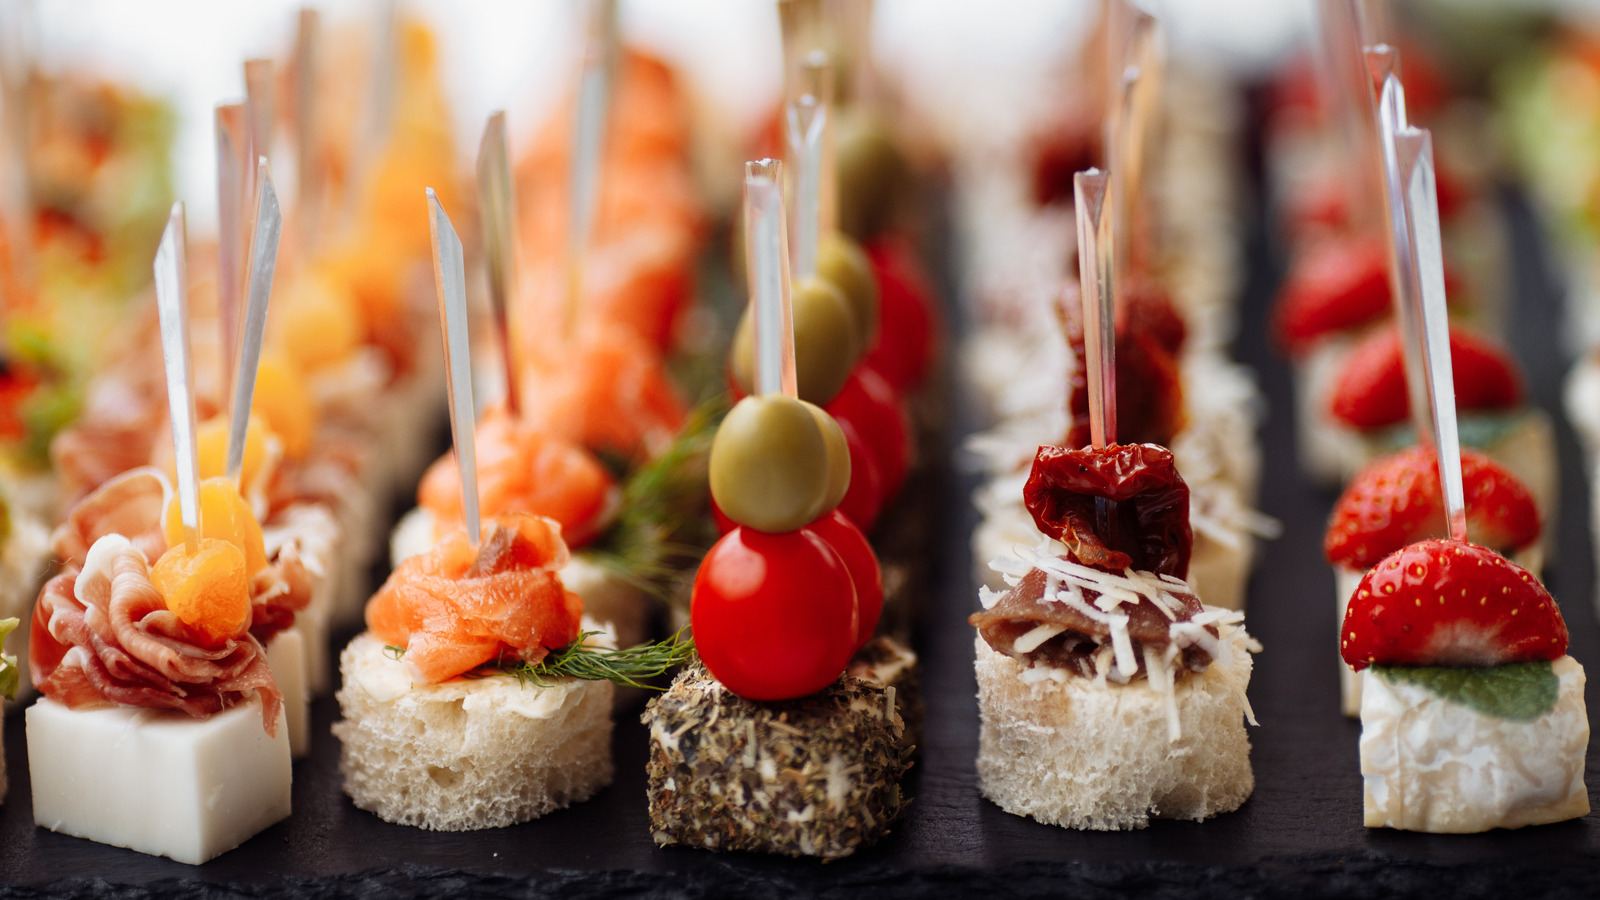 Why Canapés Should Be Constructed With Care And Simplicity